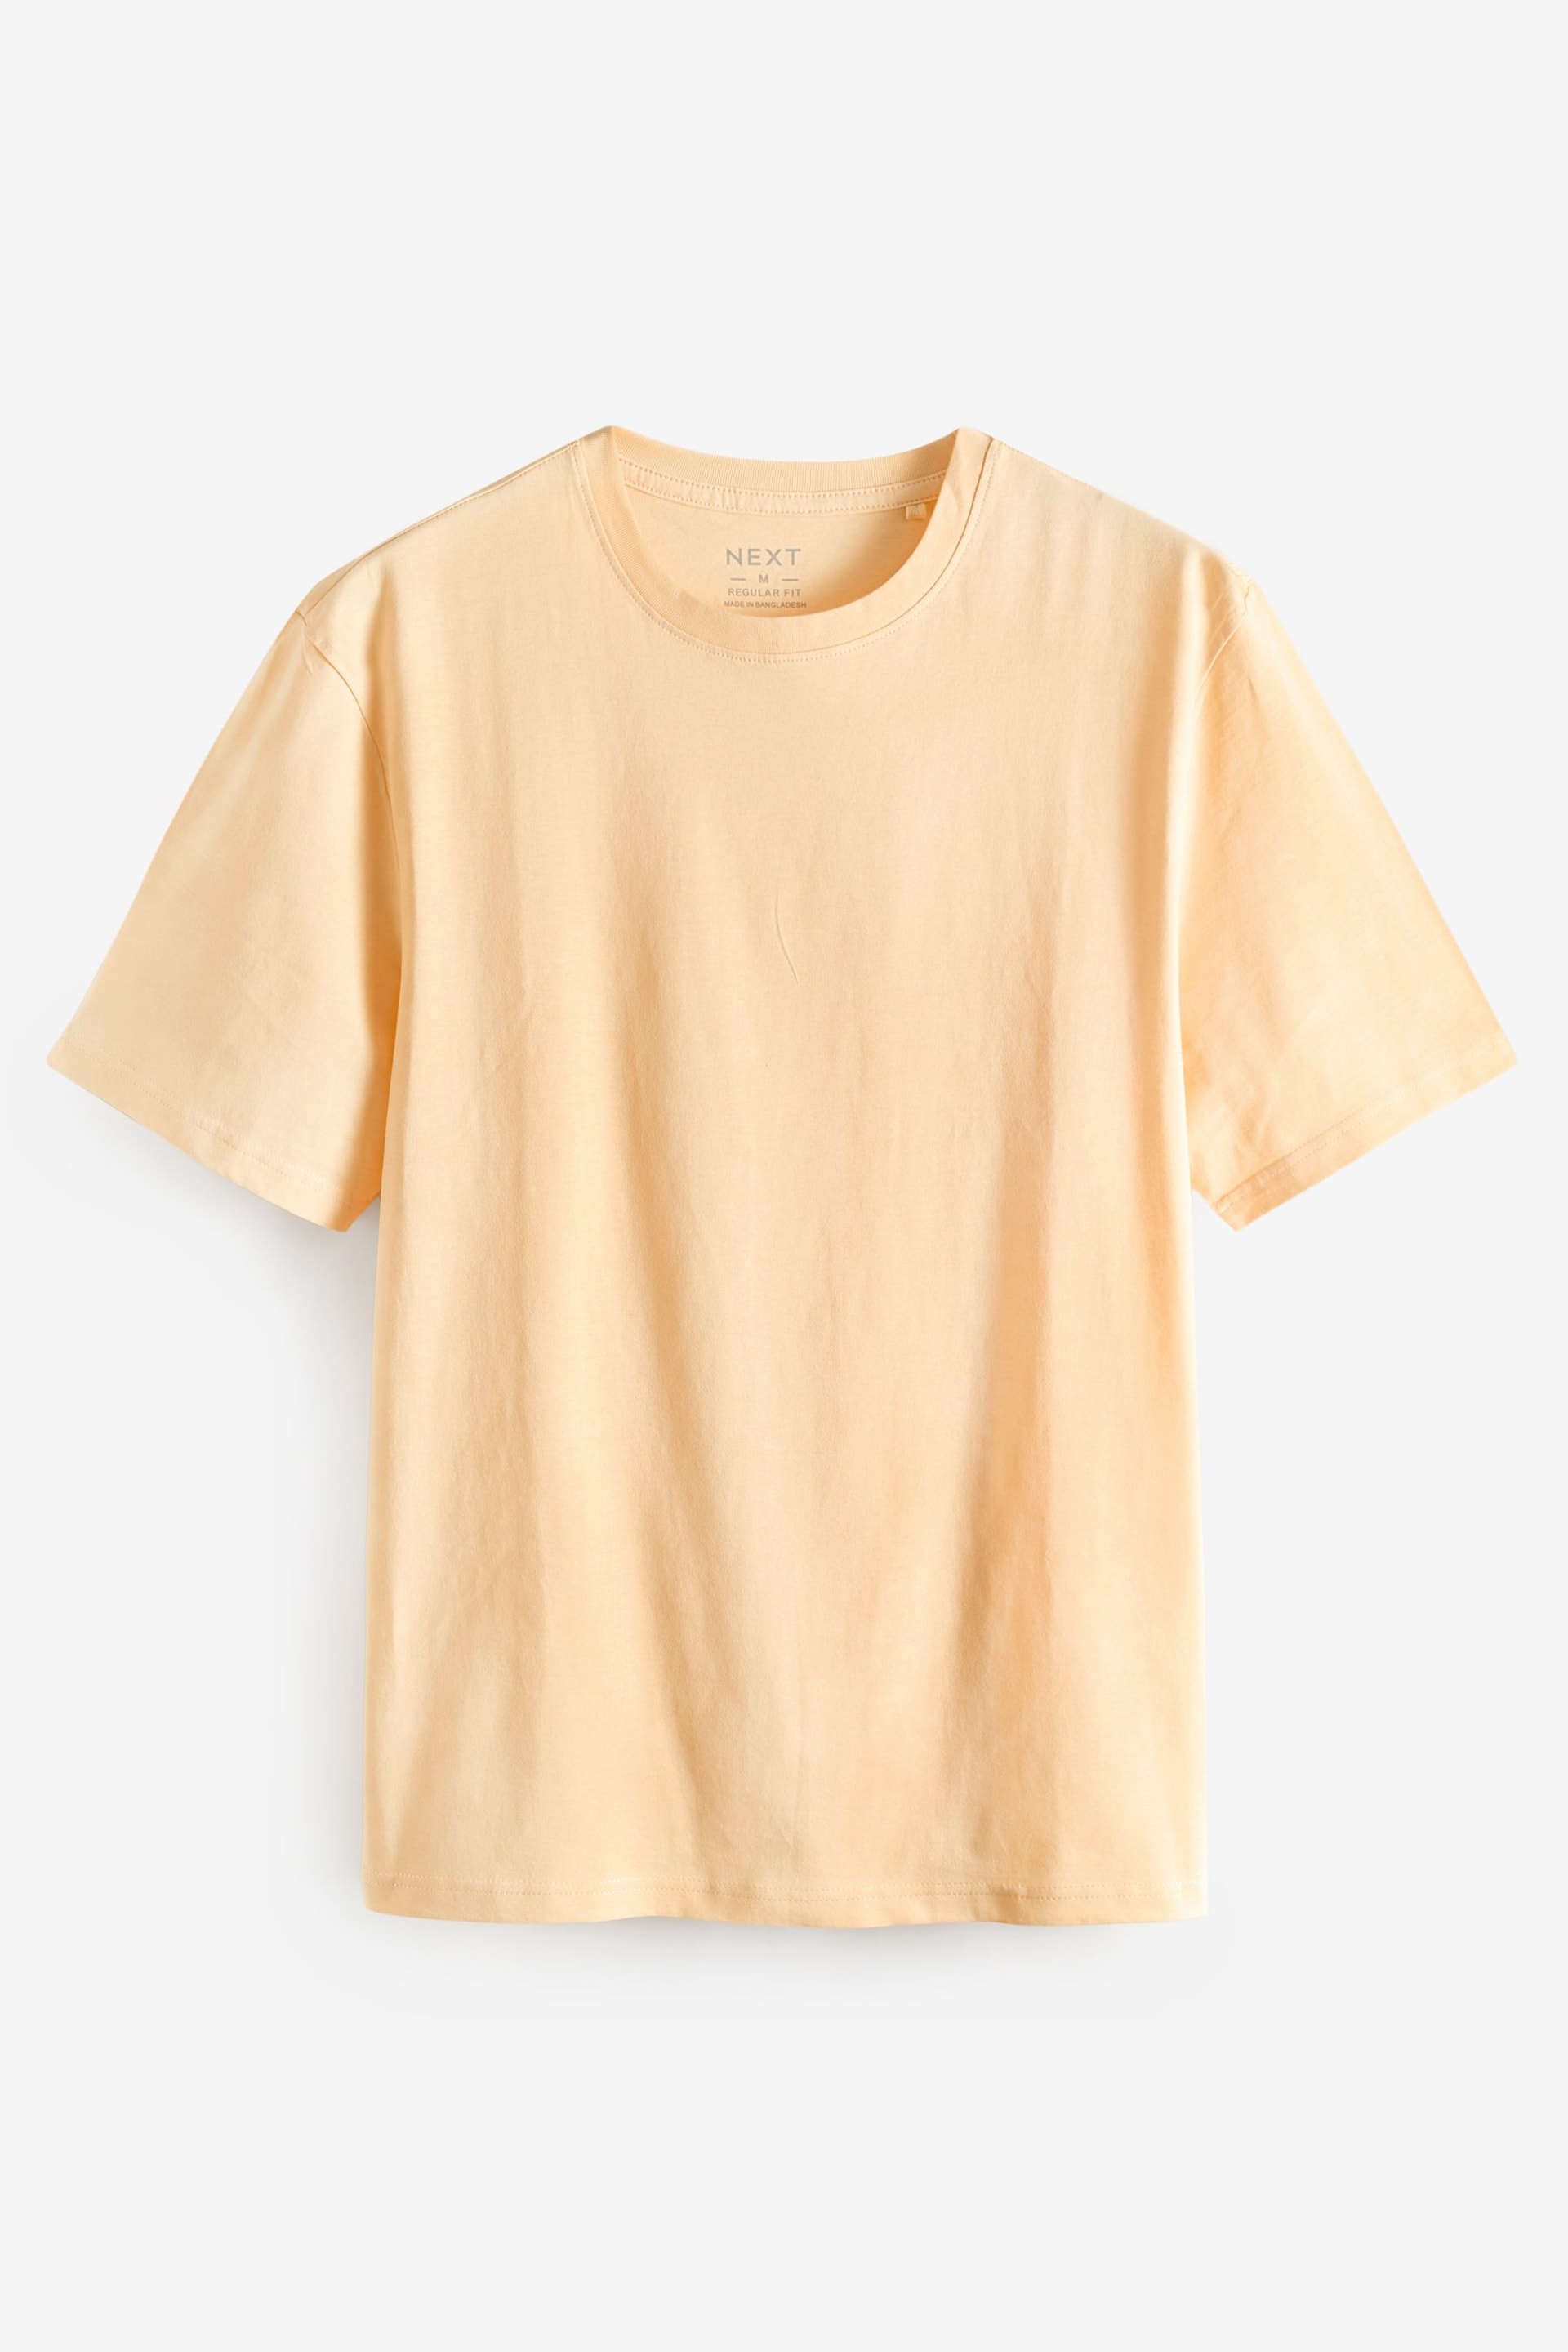 Bright Yellow Regular Fit Essential Crew Neck T-Shirt - Image 5 of 7